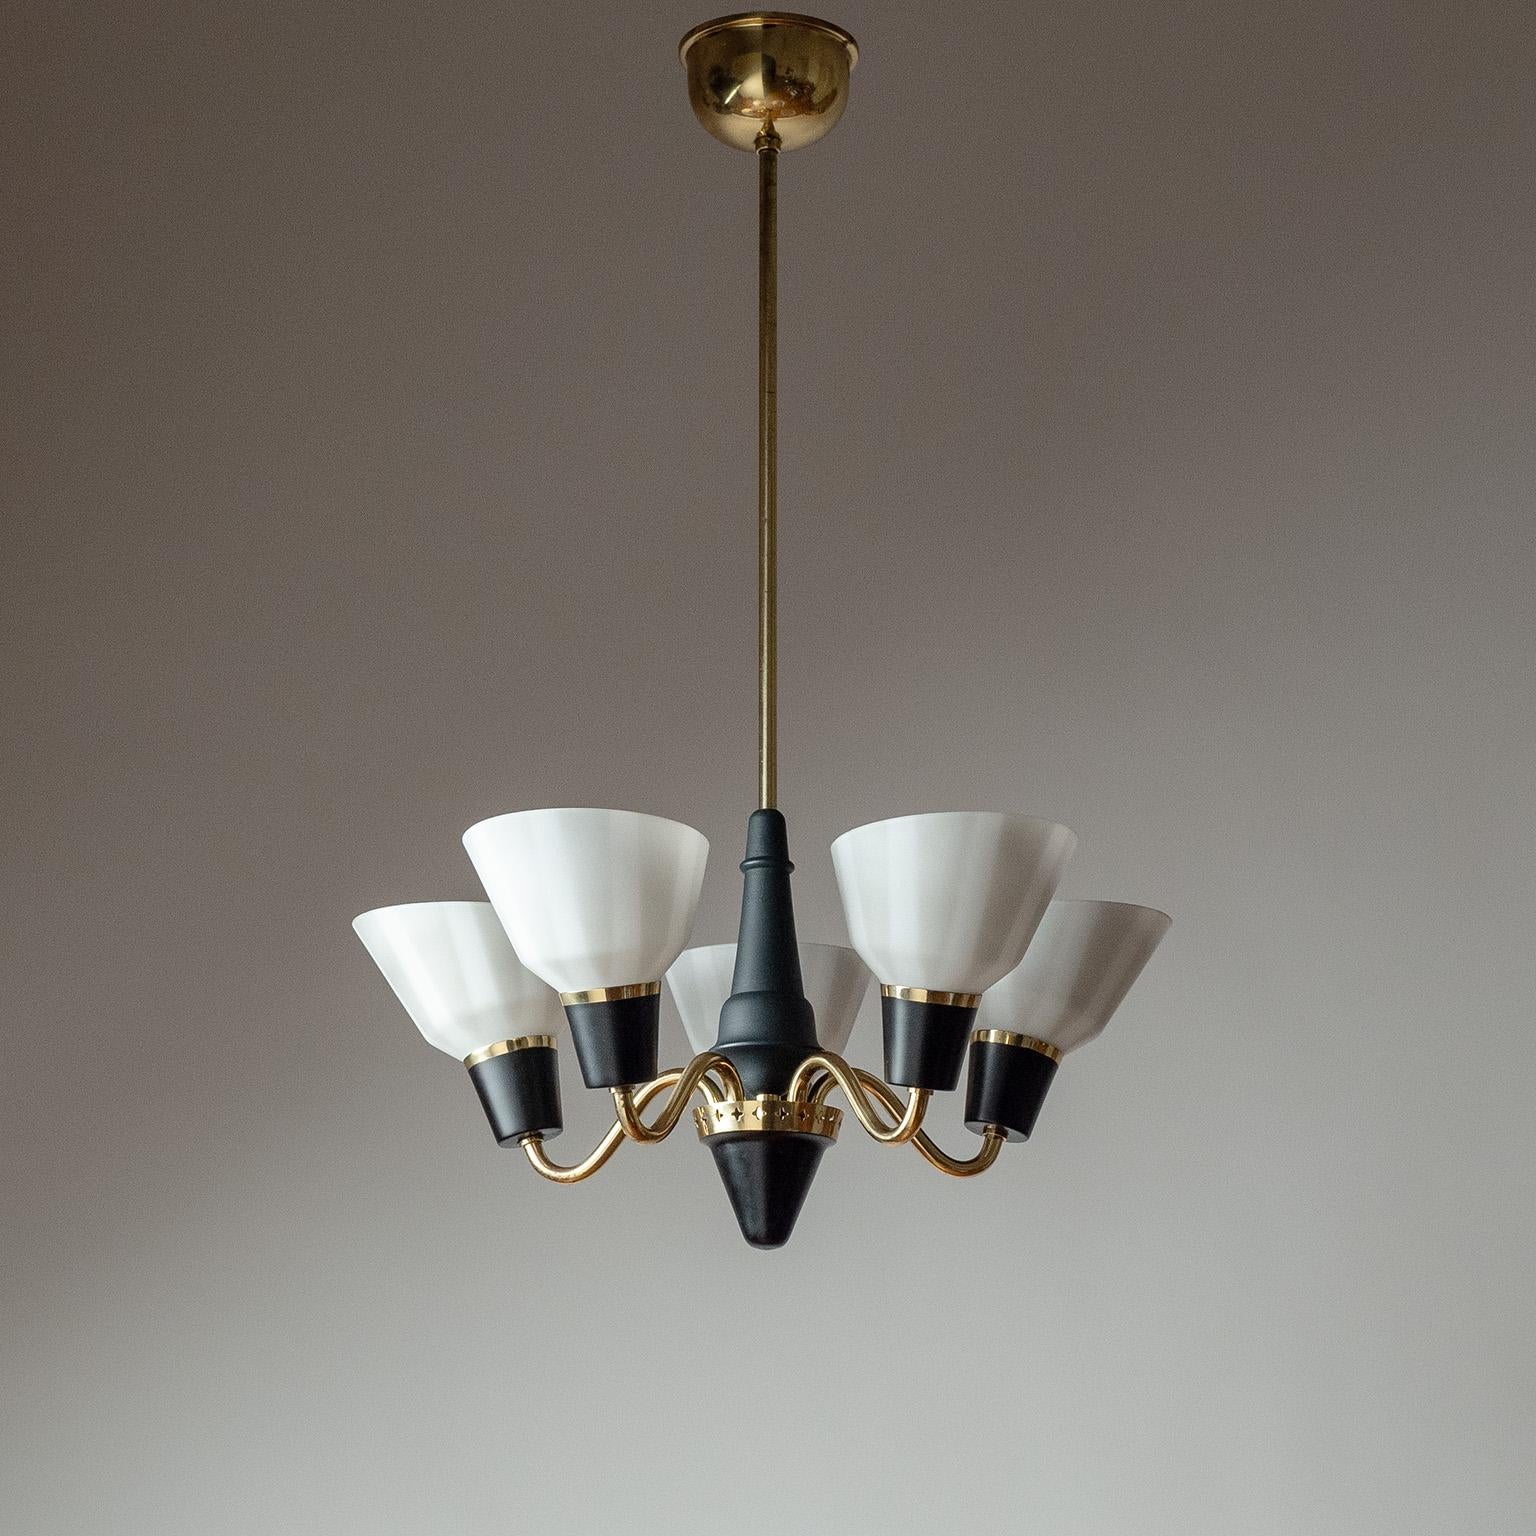 Fine Swedish brass chandelier from the 1950s with striped glass diffusers. The brass socket covers as well as the turned wood centerpiece are partially lacquered in black. Very nice original condition with a light patina on the brass. Five original